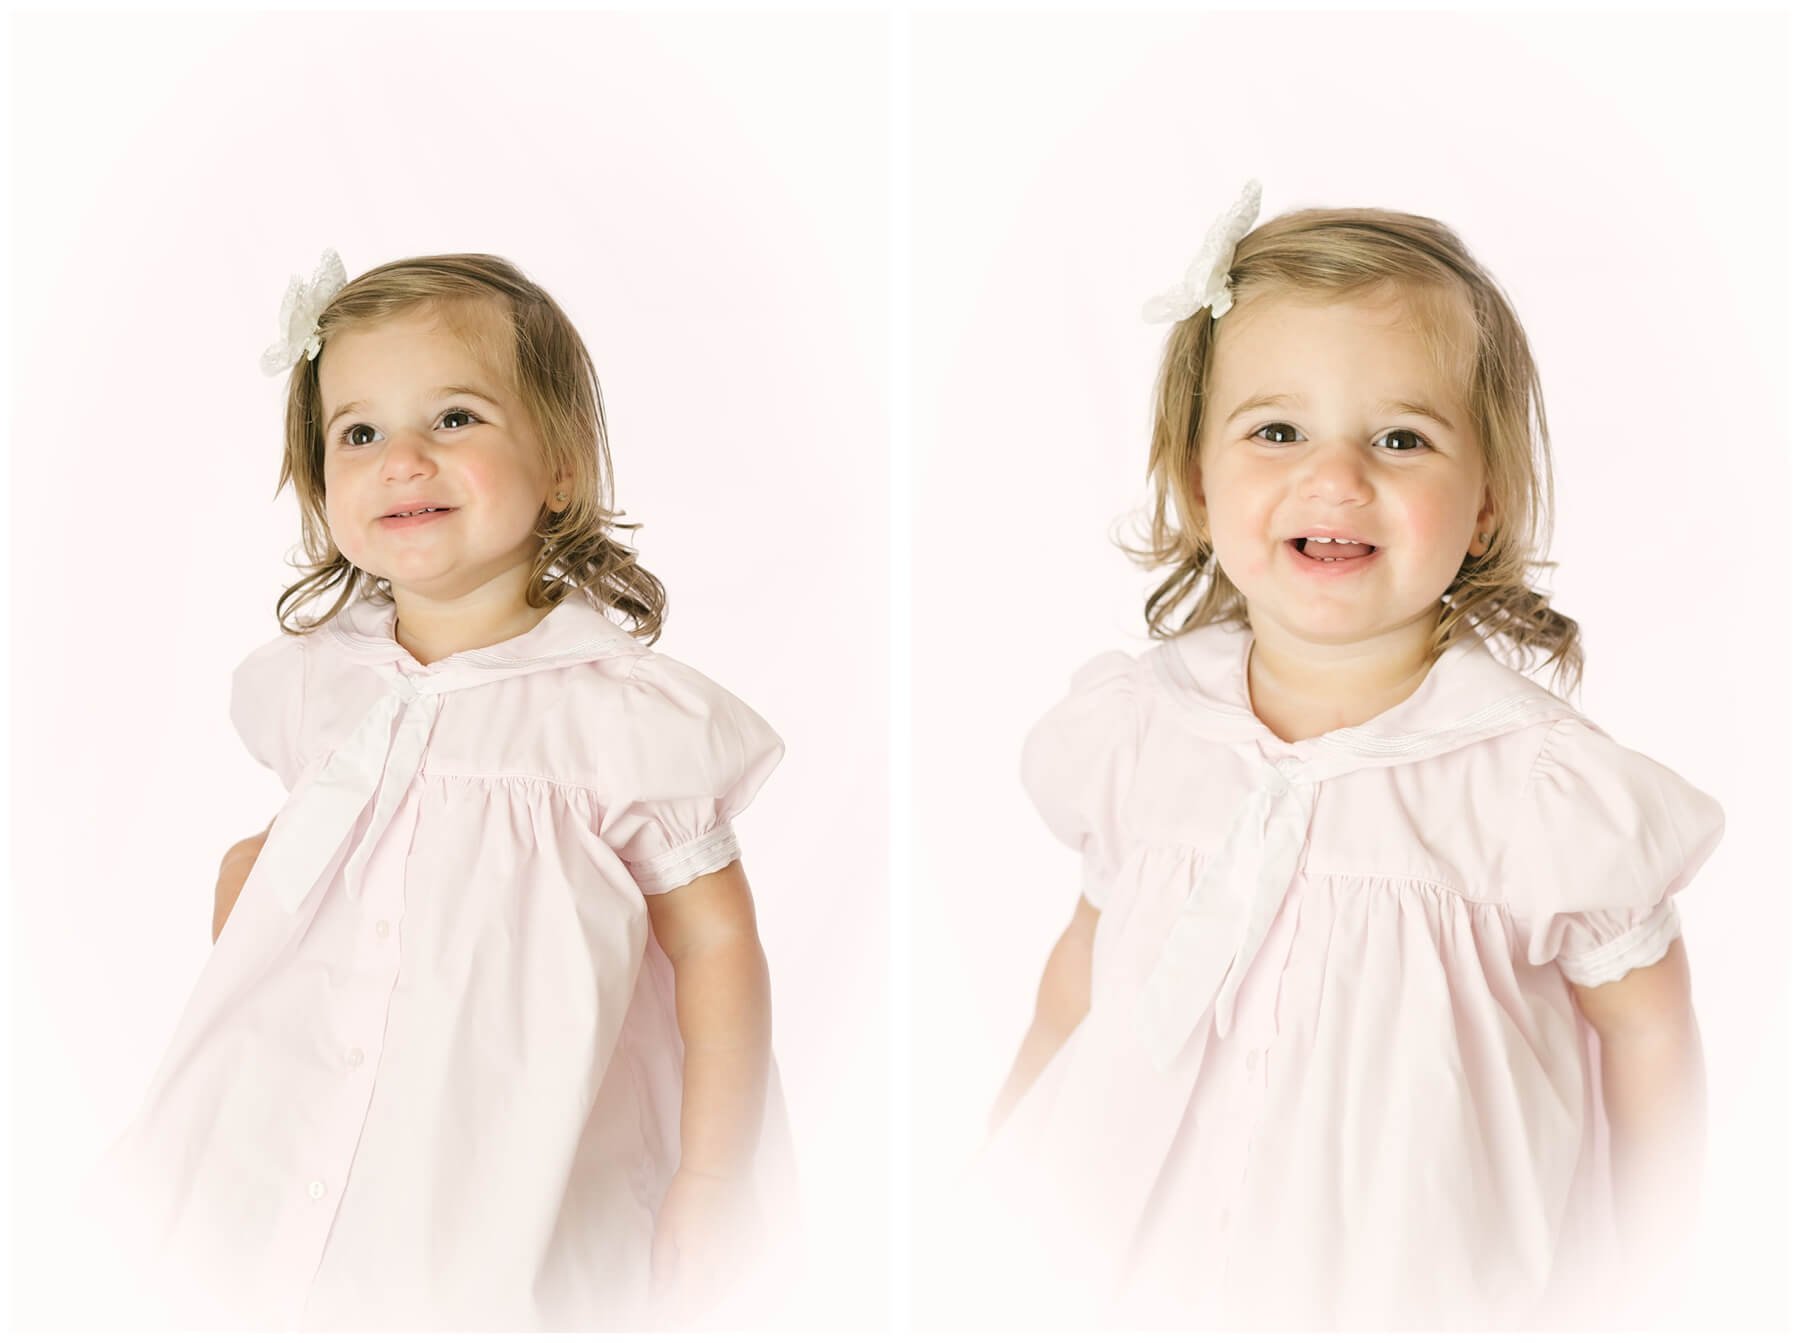 Heirloom portraits of toddler girl in pink dress | NKB Photo